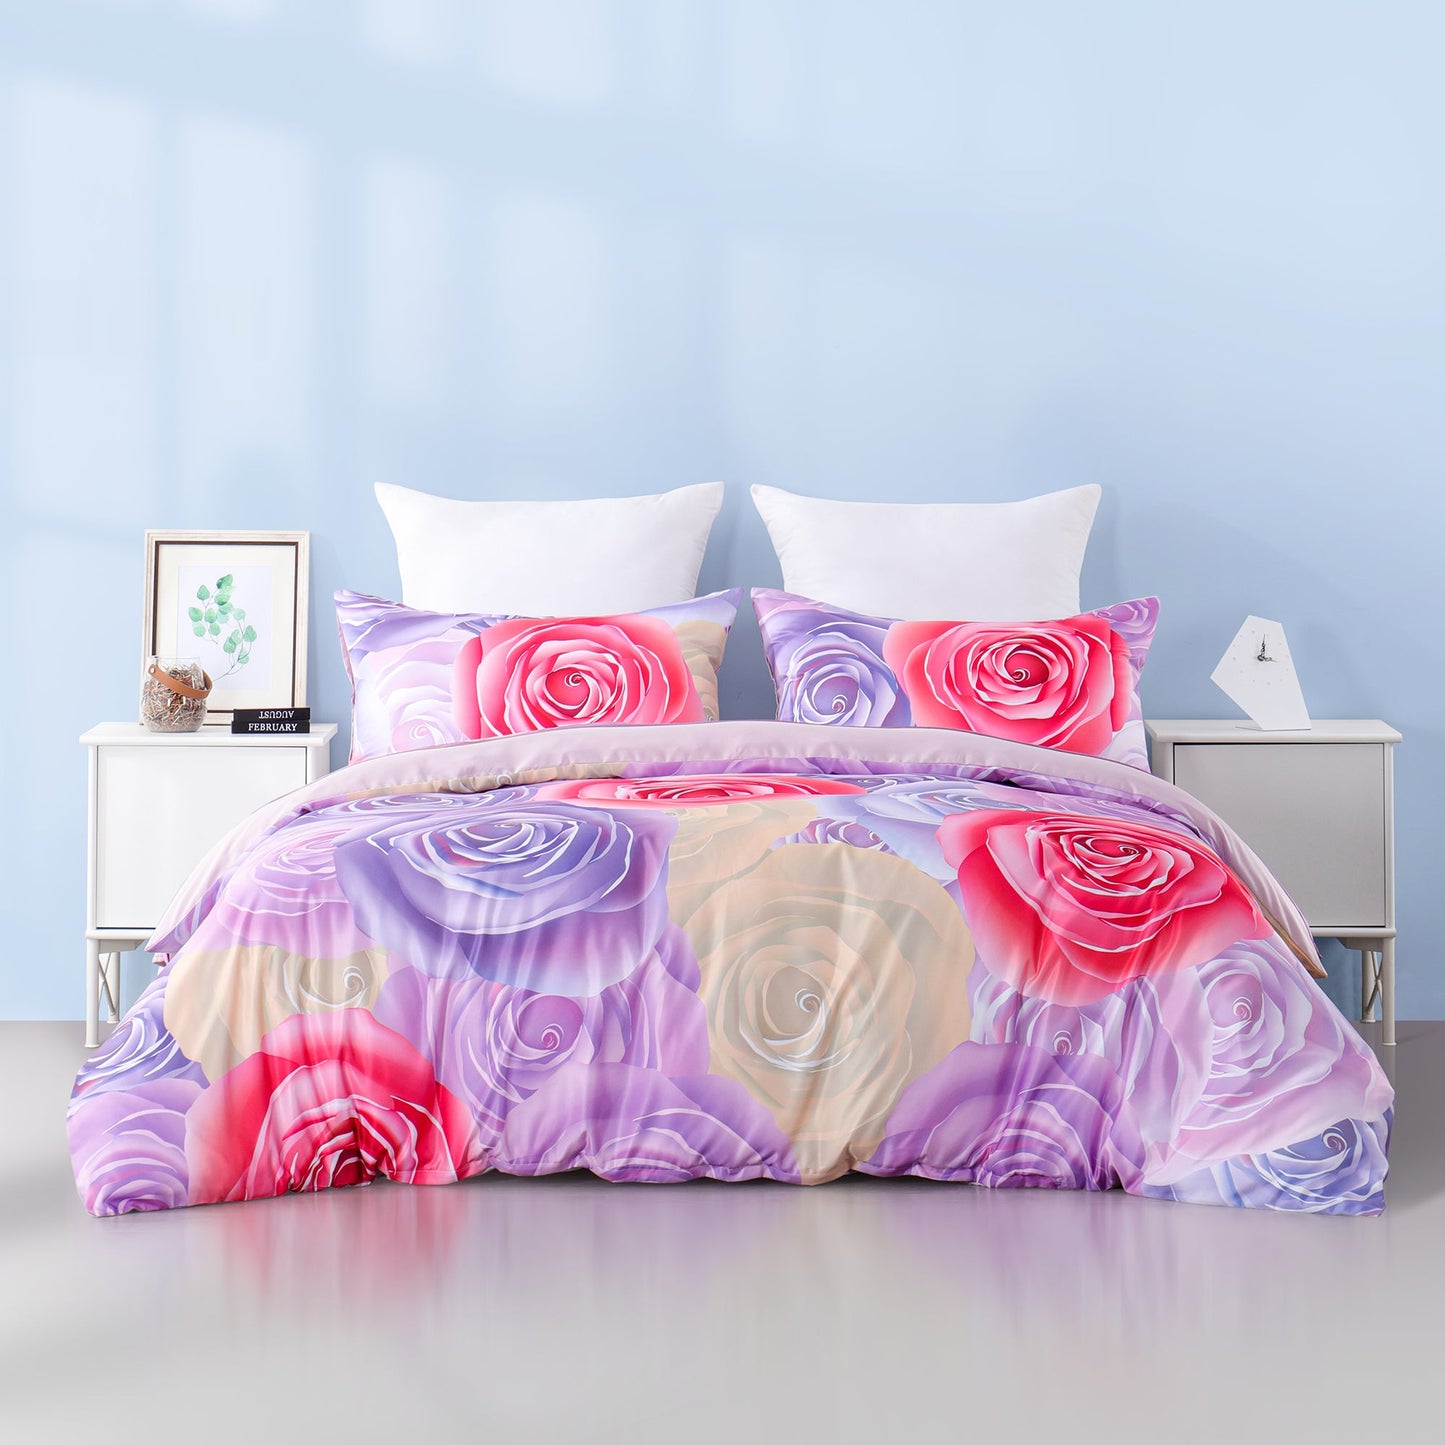 Duvet cover luxury-floral pink